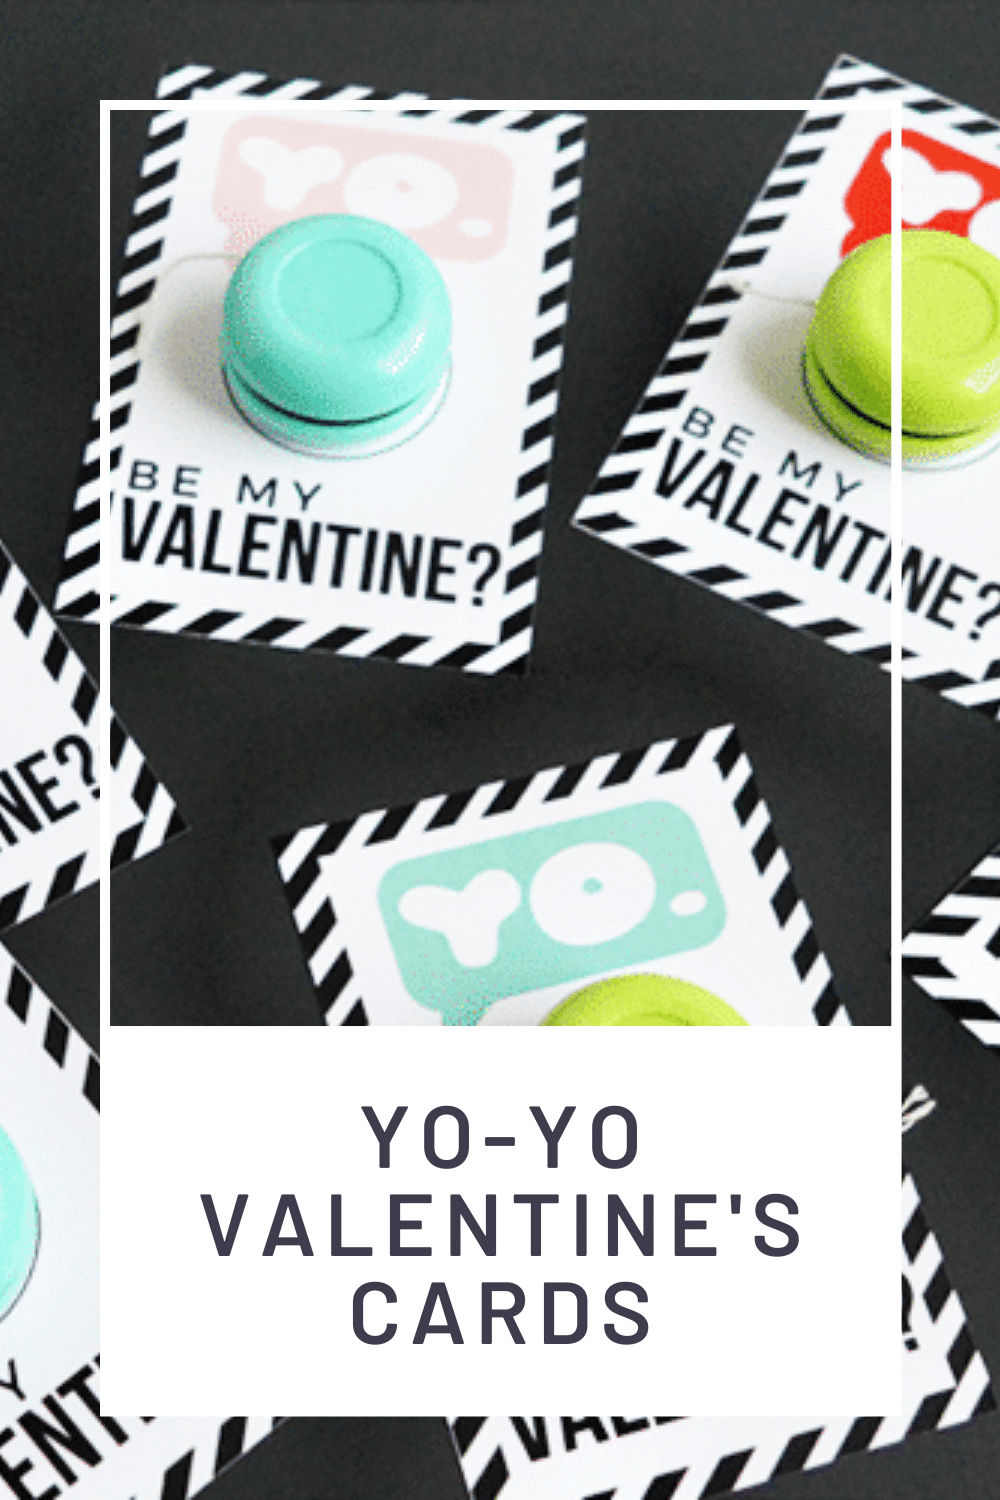 We're all about keeping things cute + simple around here, and these Yo-Yo Valentines Printables do just that! The Valentine's Day printable cards are perfect and unique and the kids will absolutely love them. If you want to skip the candy this year and do something fun, these cards are exactly what you're looking for. via @somewhatsimple